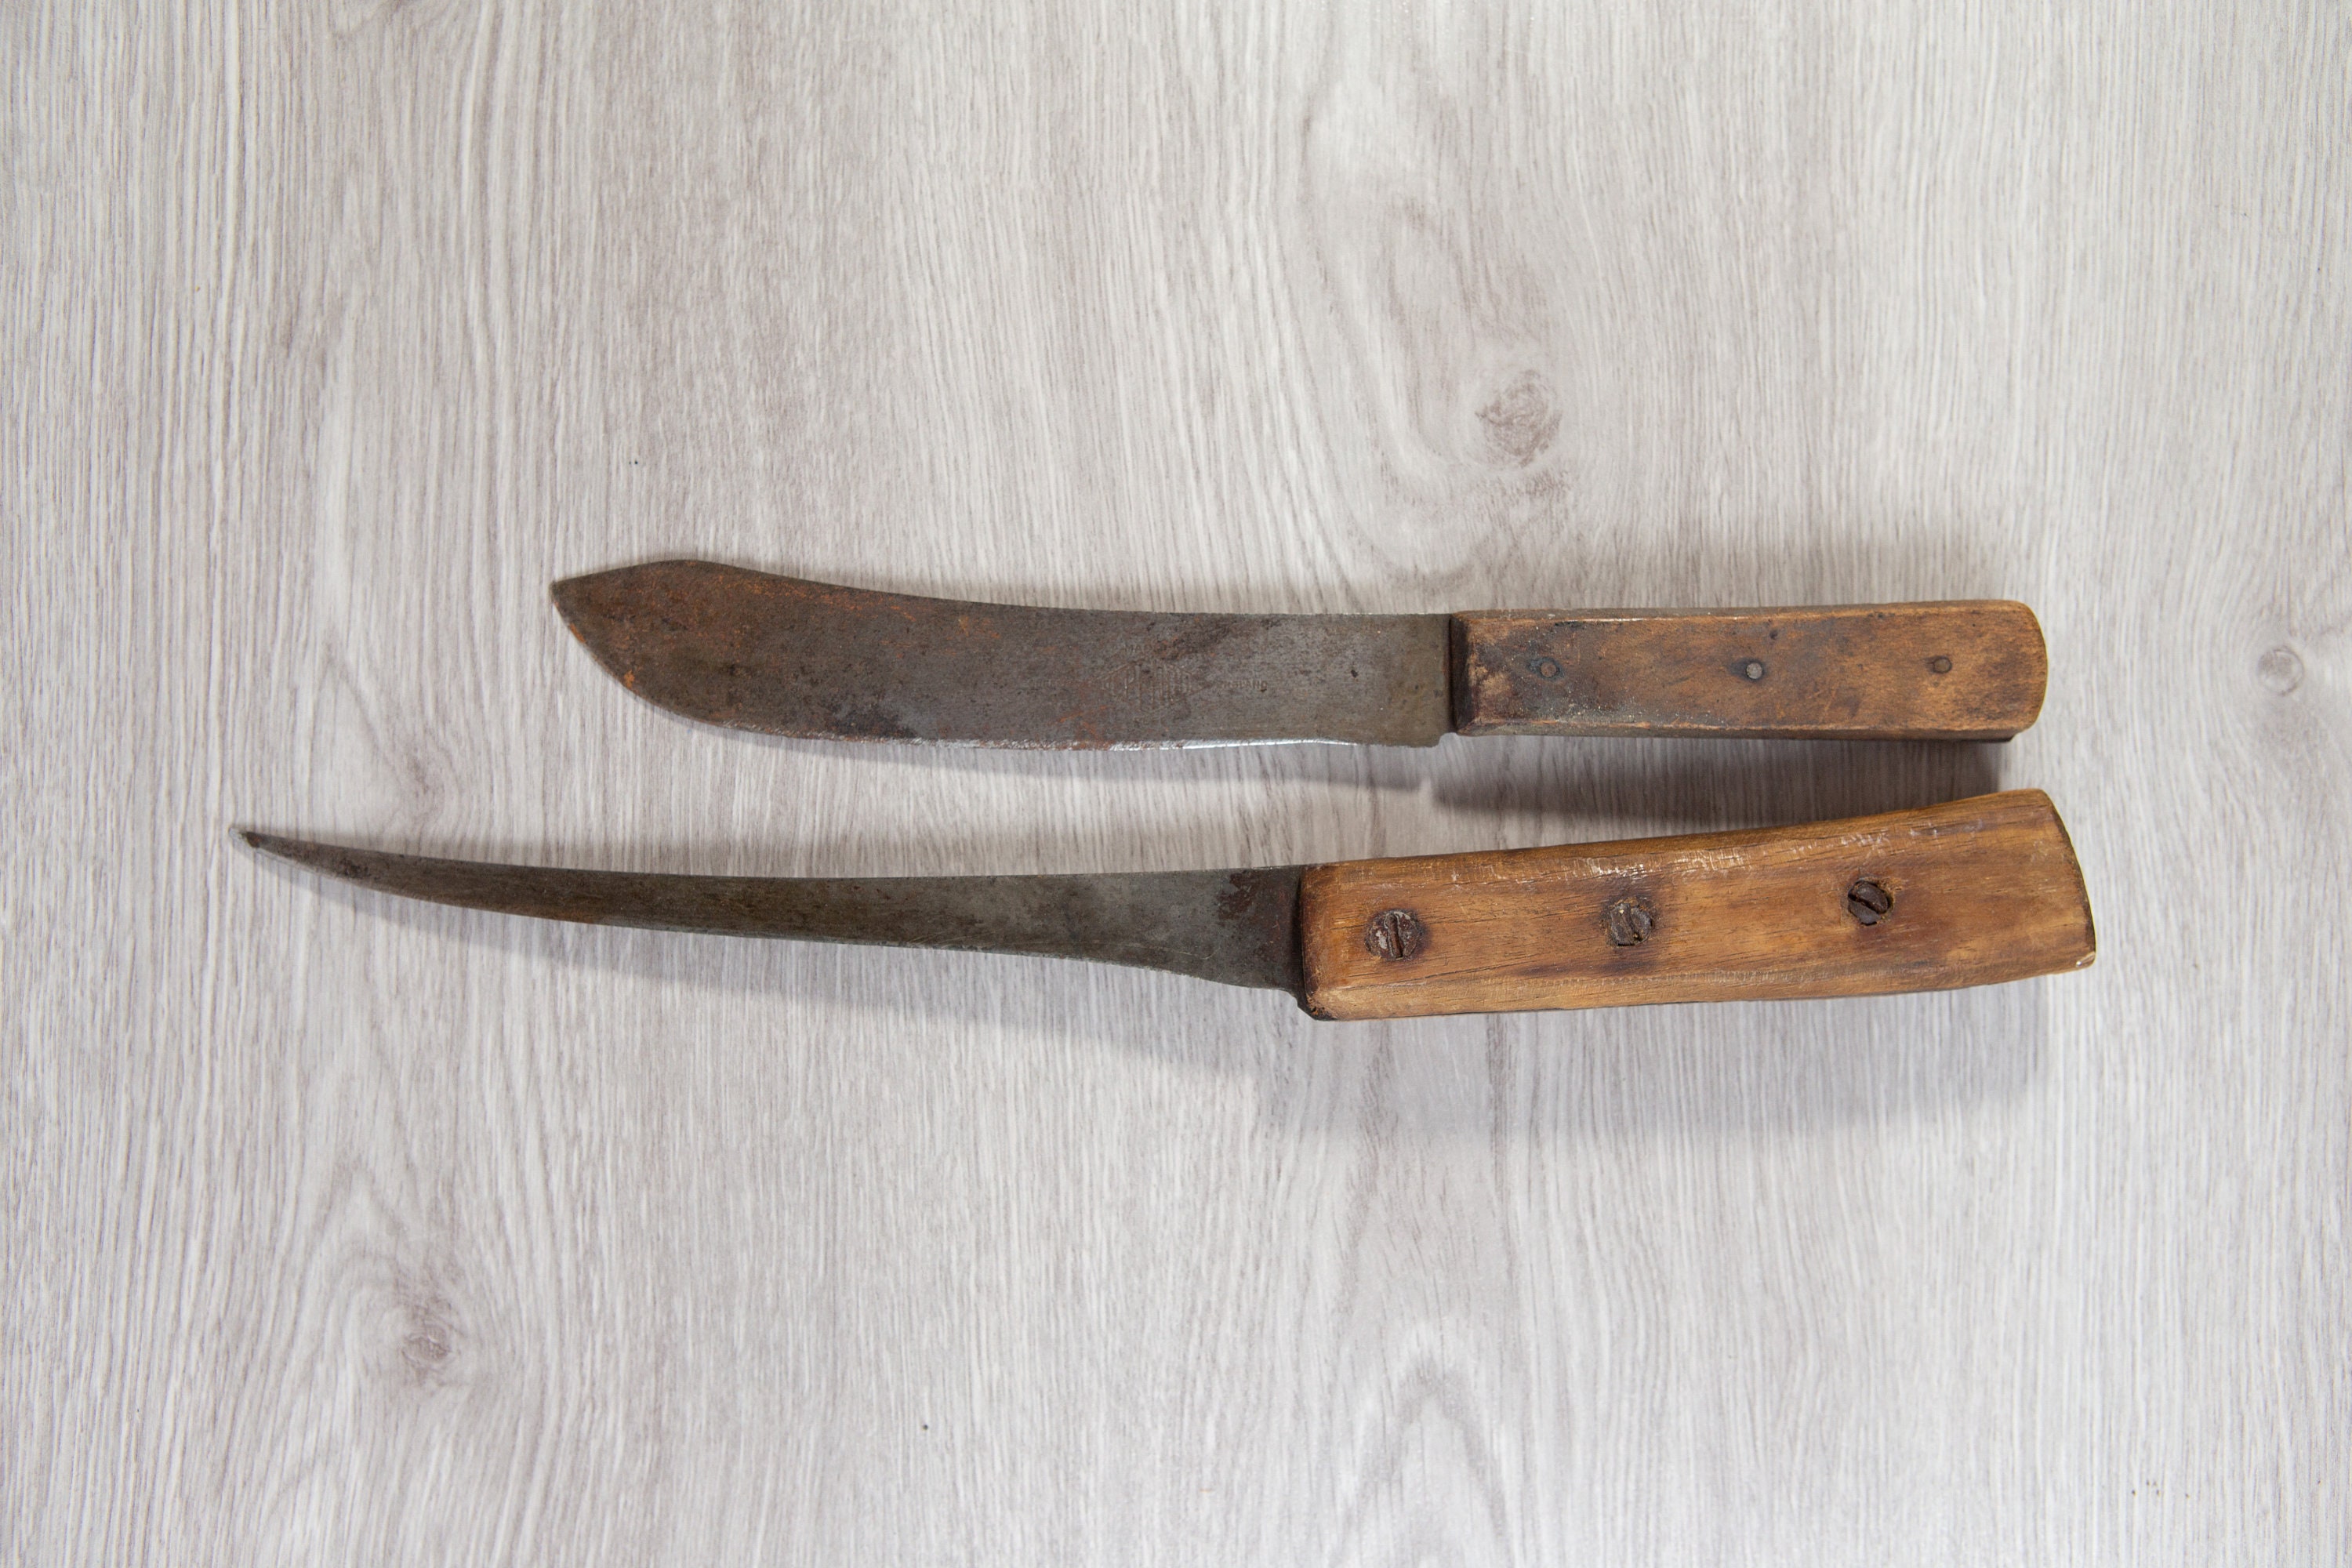 Vintage Knives with Wood Handles - Rustic Farmhouse Kitchen Decor - Fish  Scaling Filet Knife - Father's Day Gift for Him